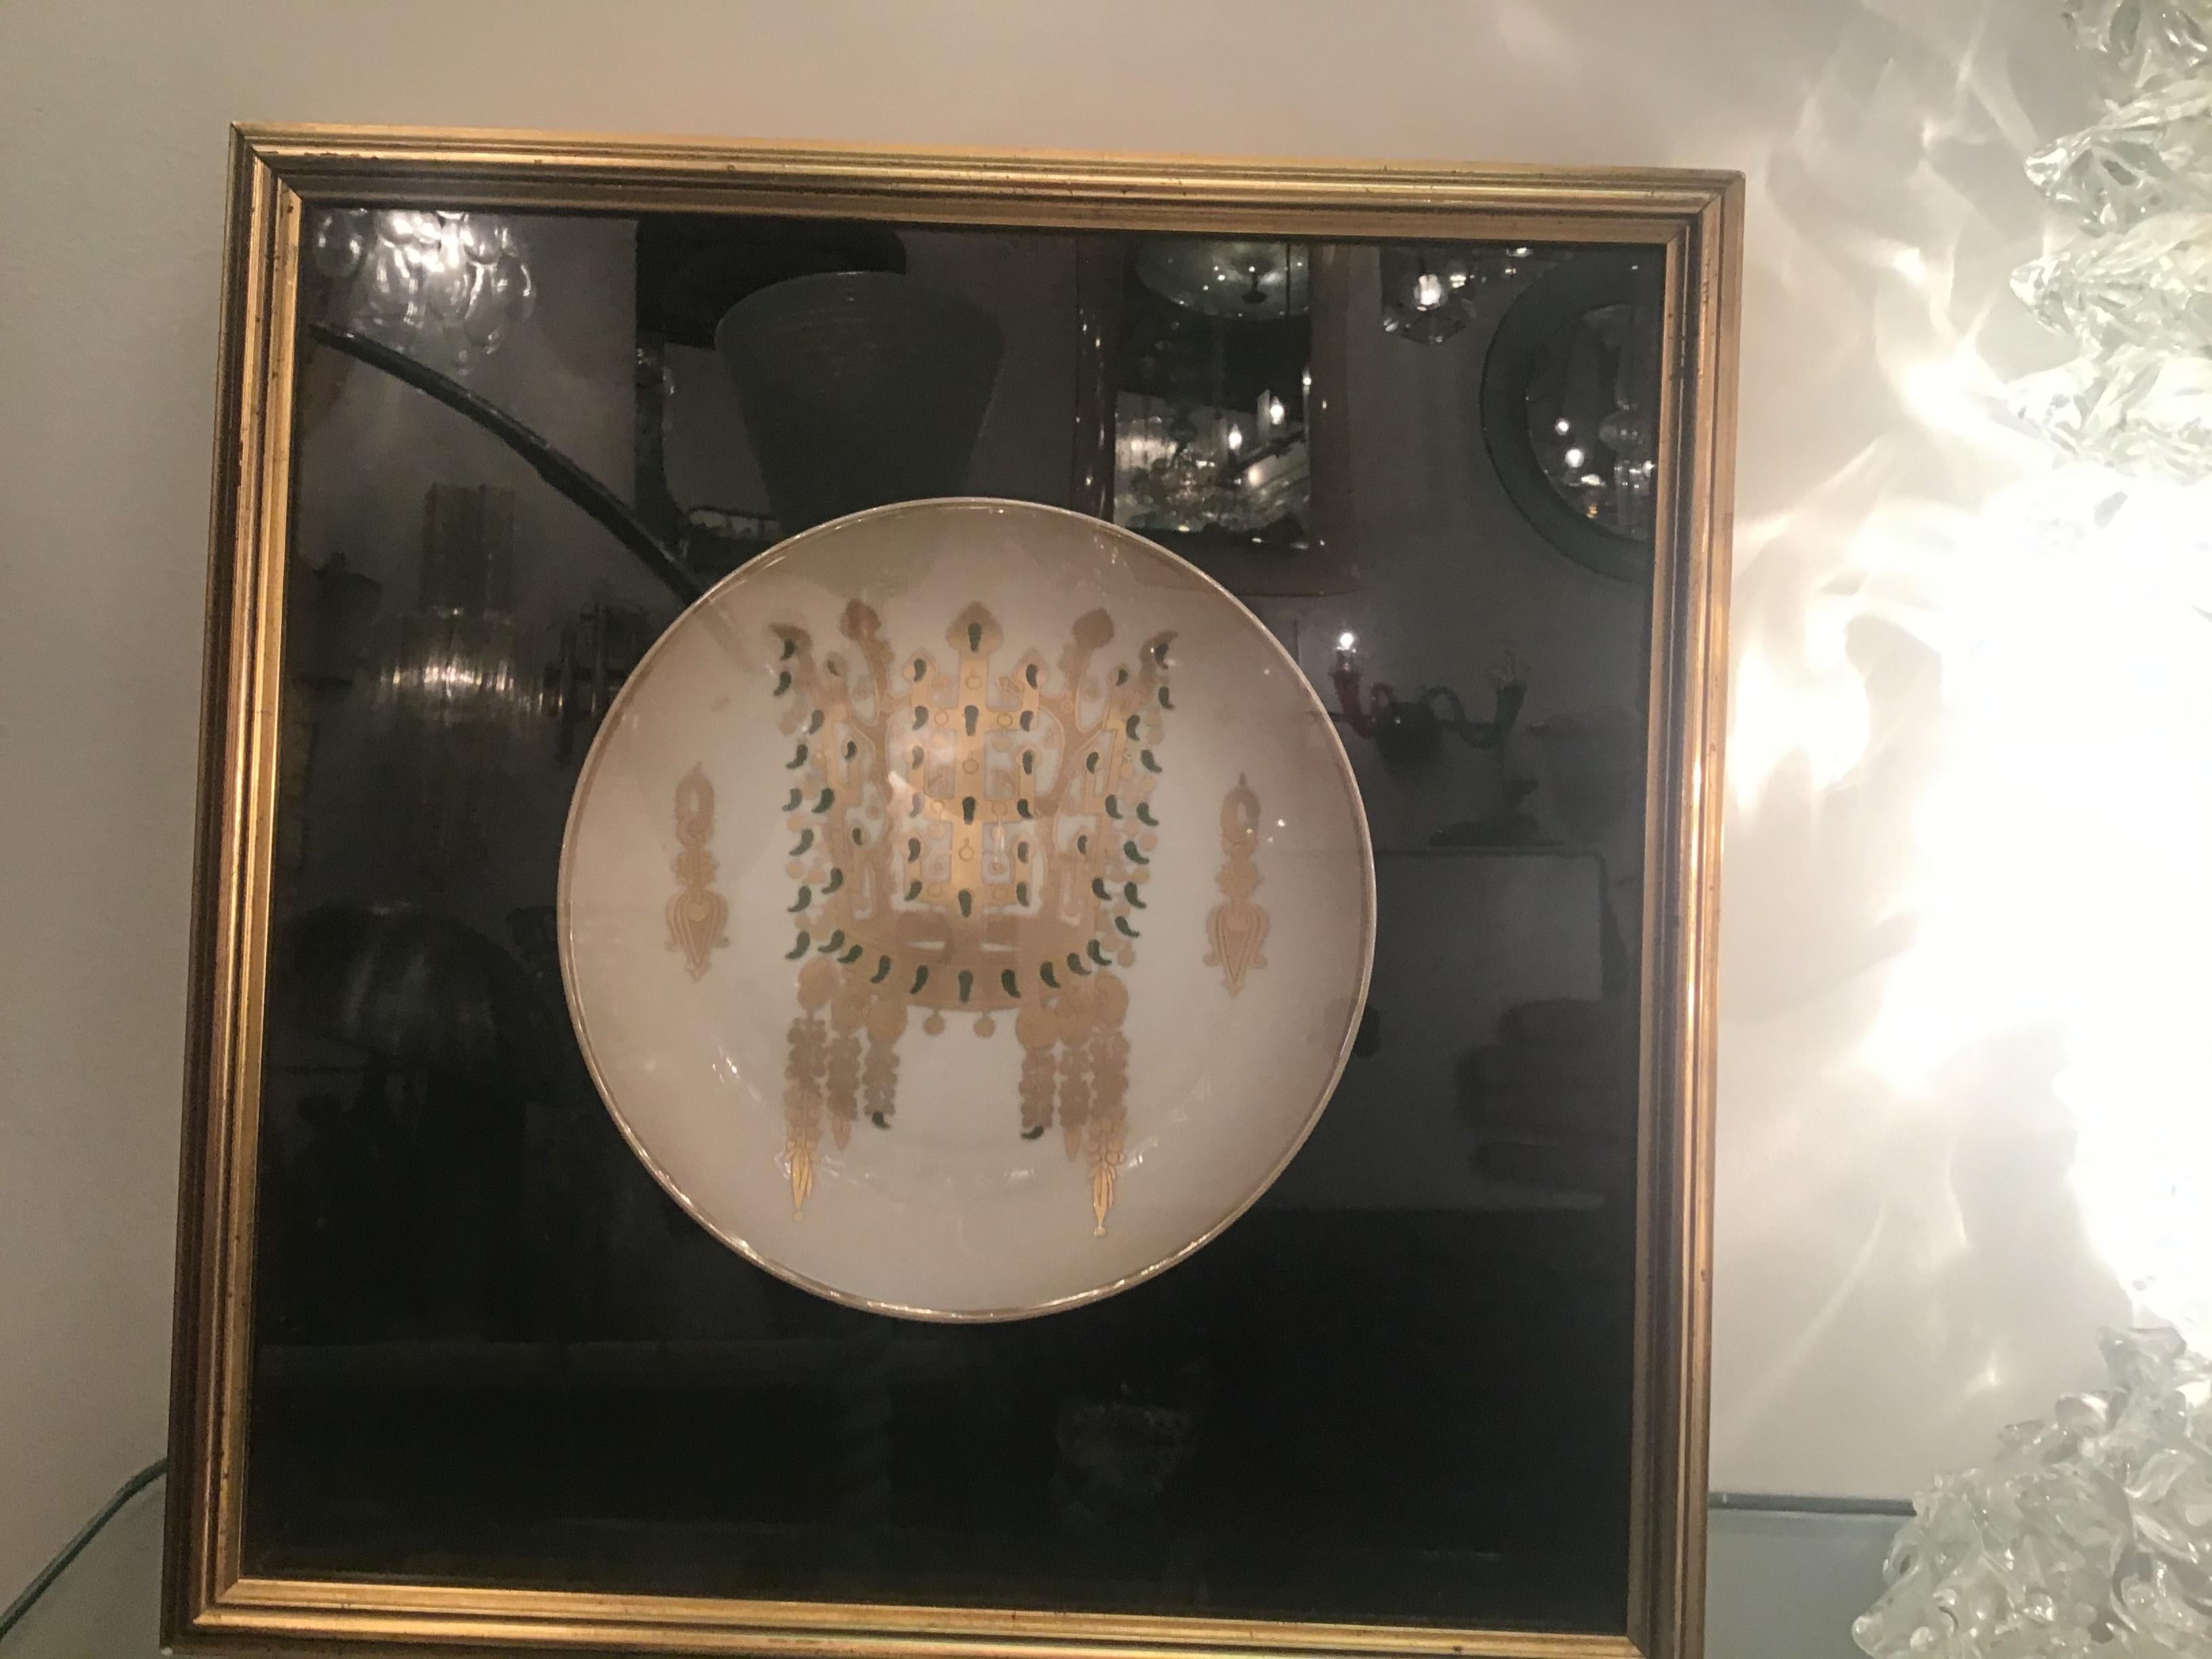 Morbelli Porcelain Wall Plates Worked with Pure Gold 1960 Italy For Sale 3